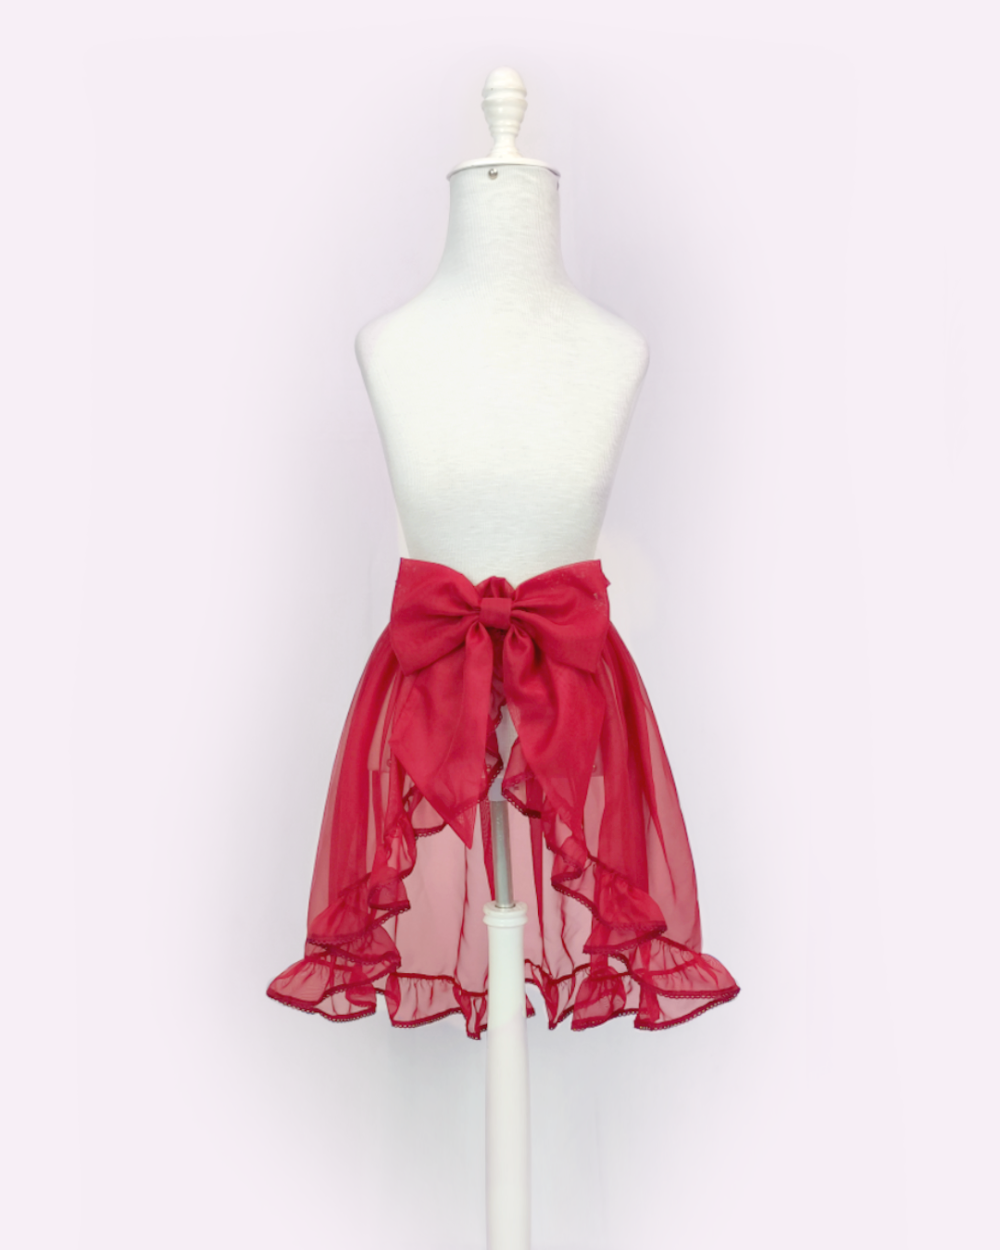 Cherry and wine Overskirt made of voile, viscose lace and a detachable bow. by melikestea.